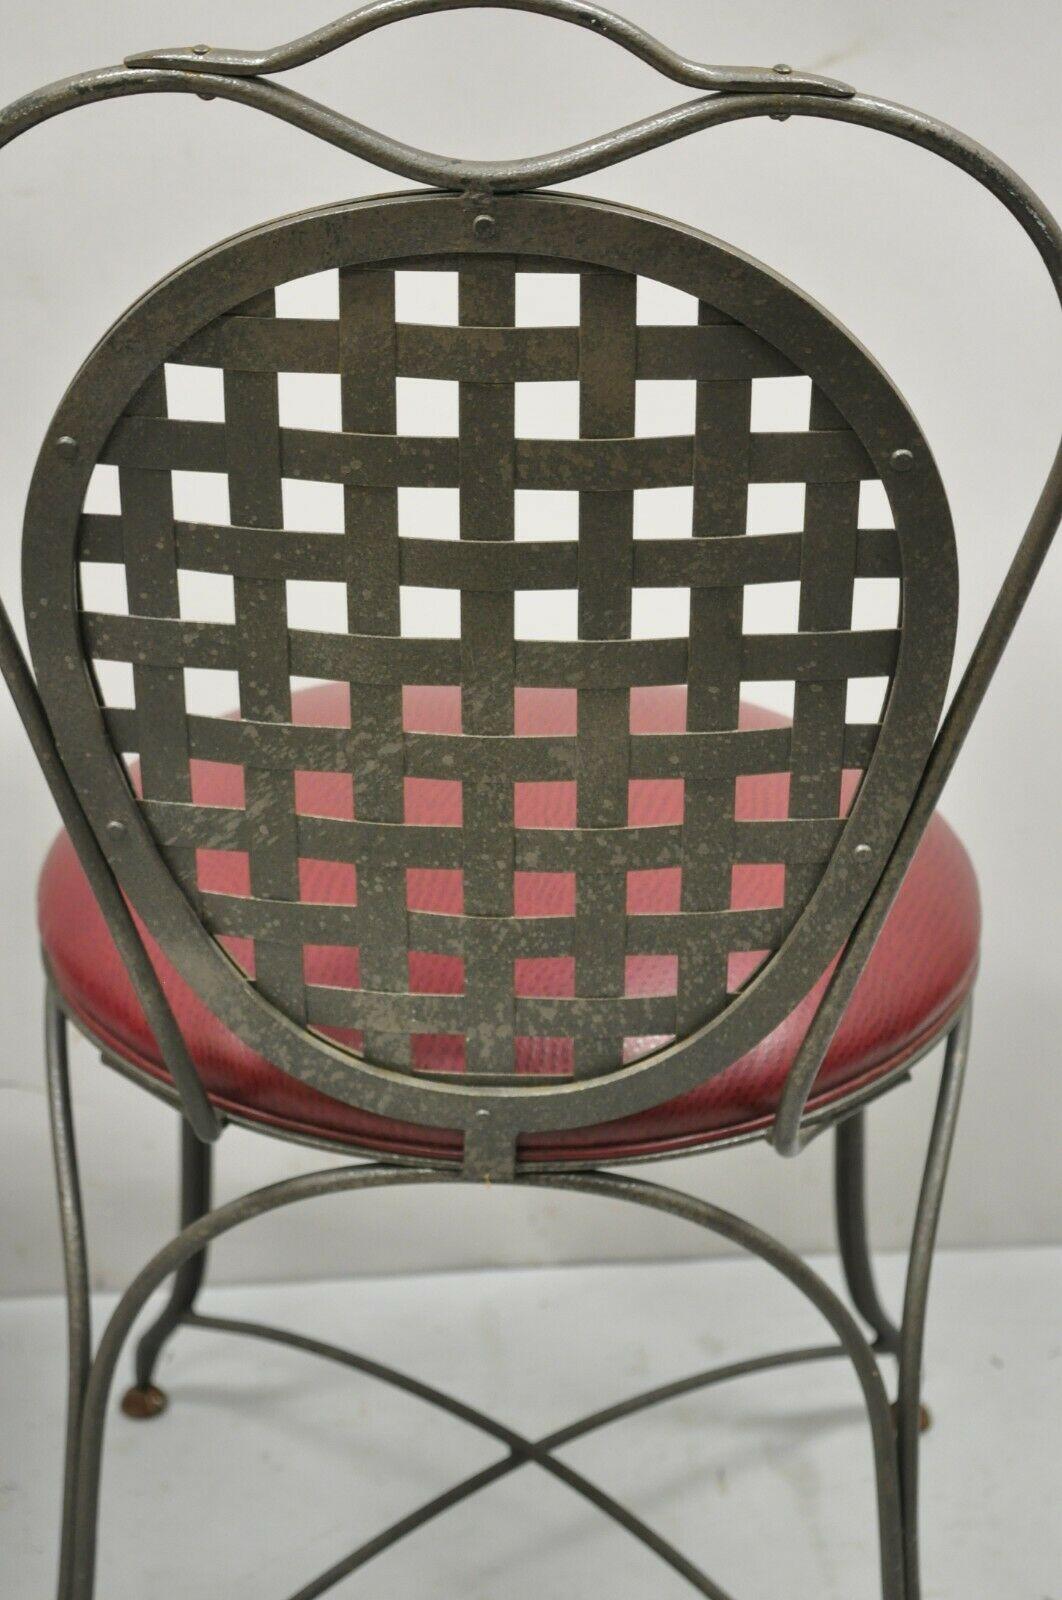 Italian Regency Style Wrought Iron Sunroom Lattice Round Seat Chairs, a Pair For Sale 6